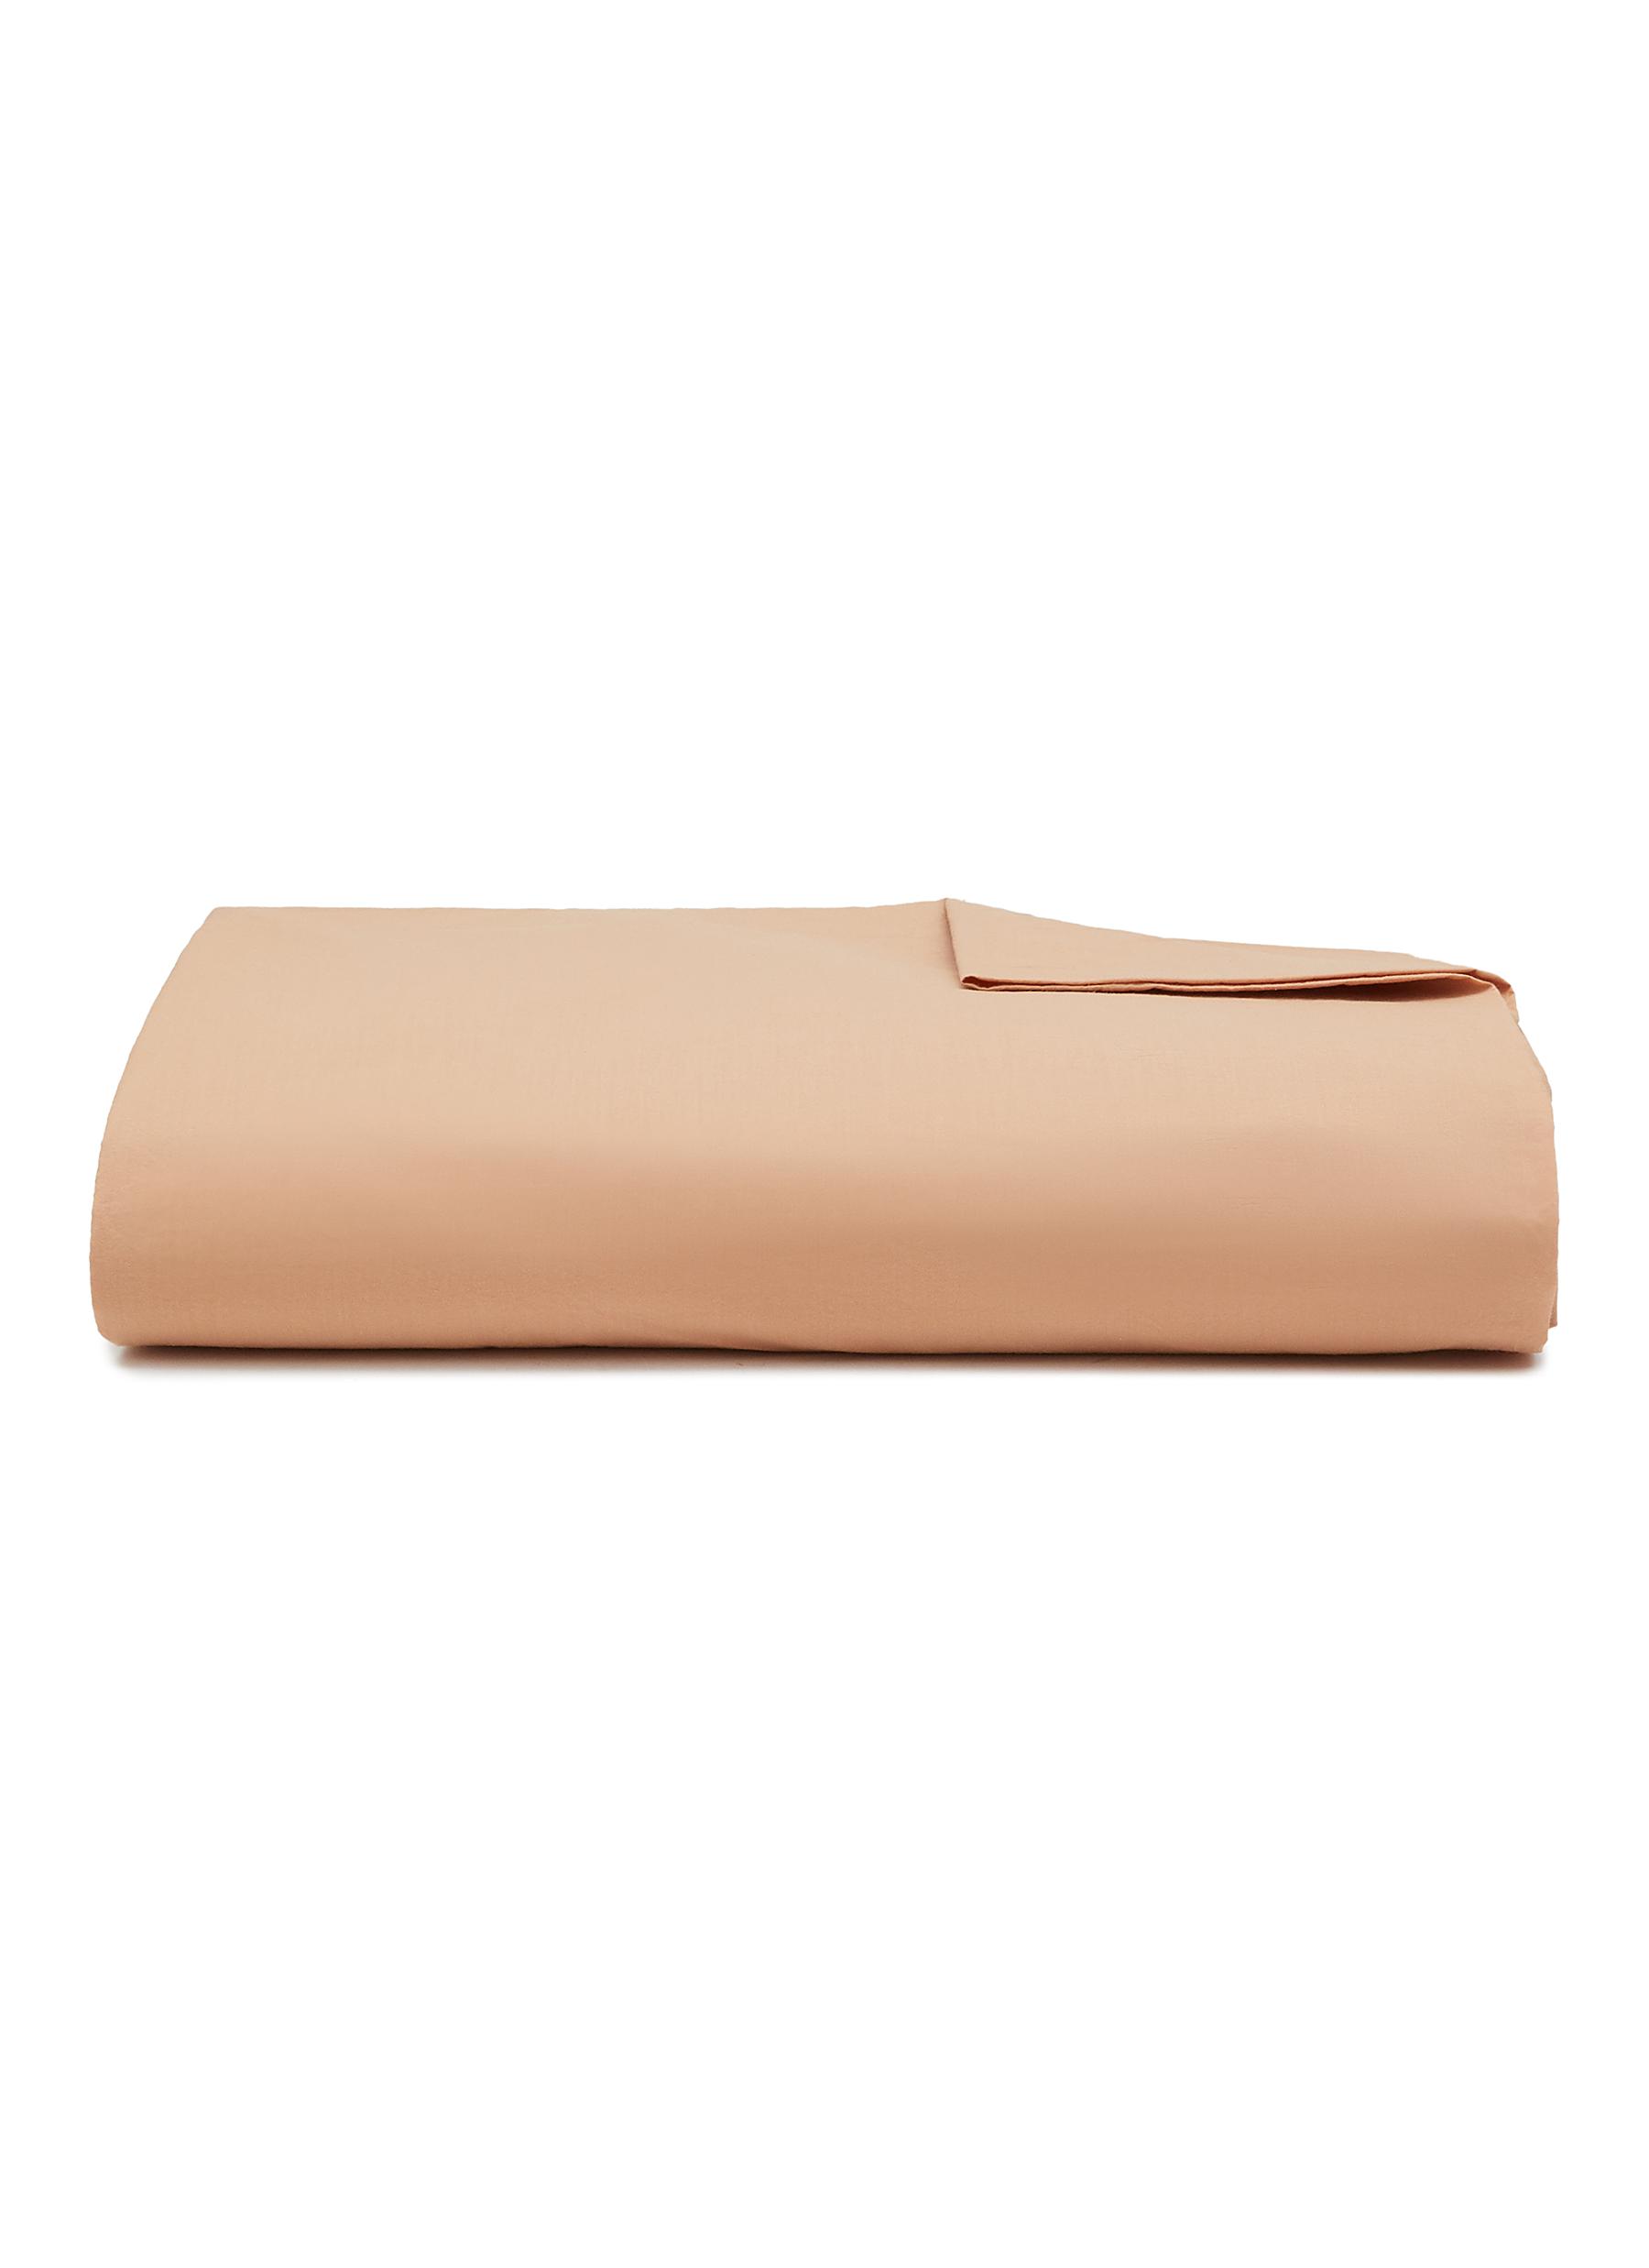 Nite King Size Fitted Sheet - Albicocca